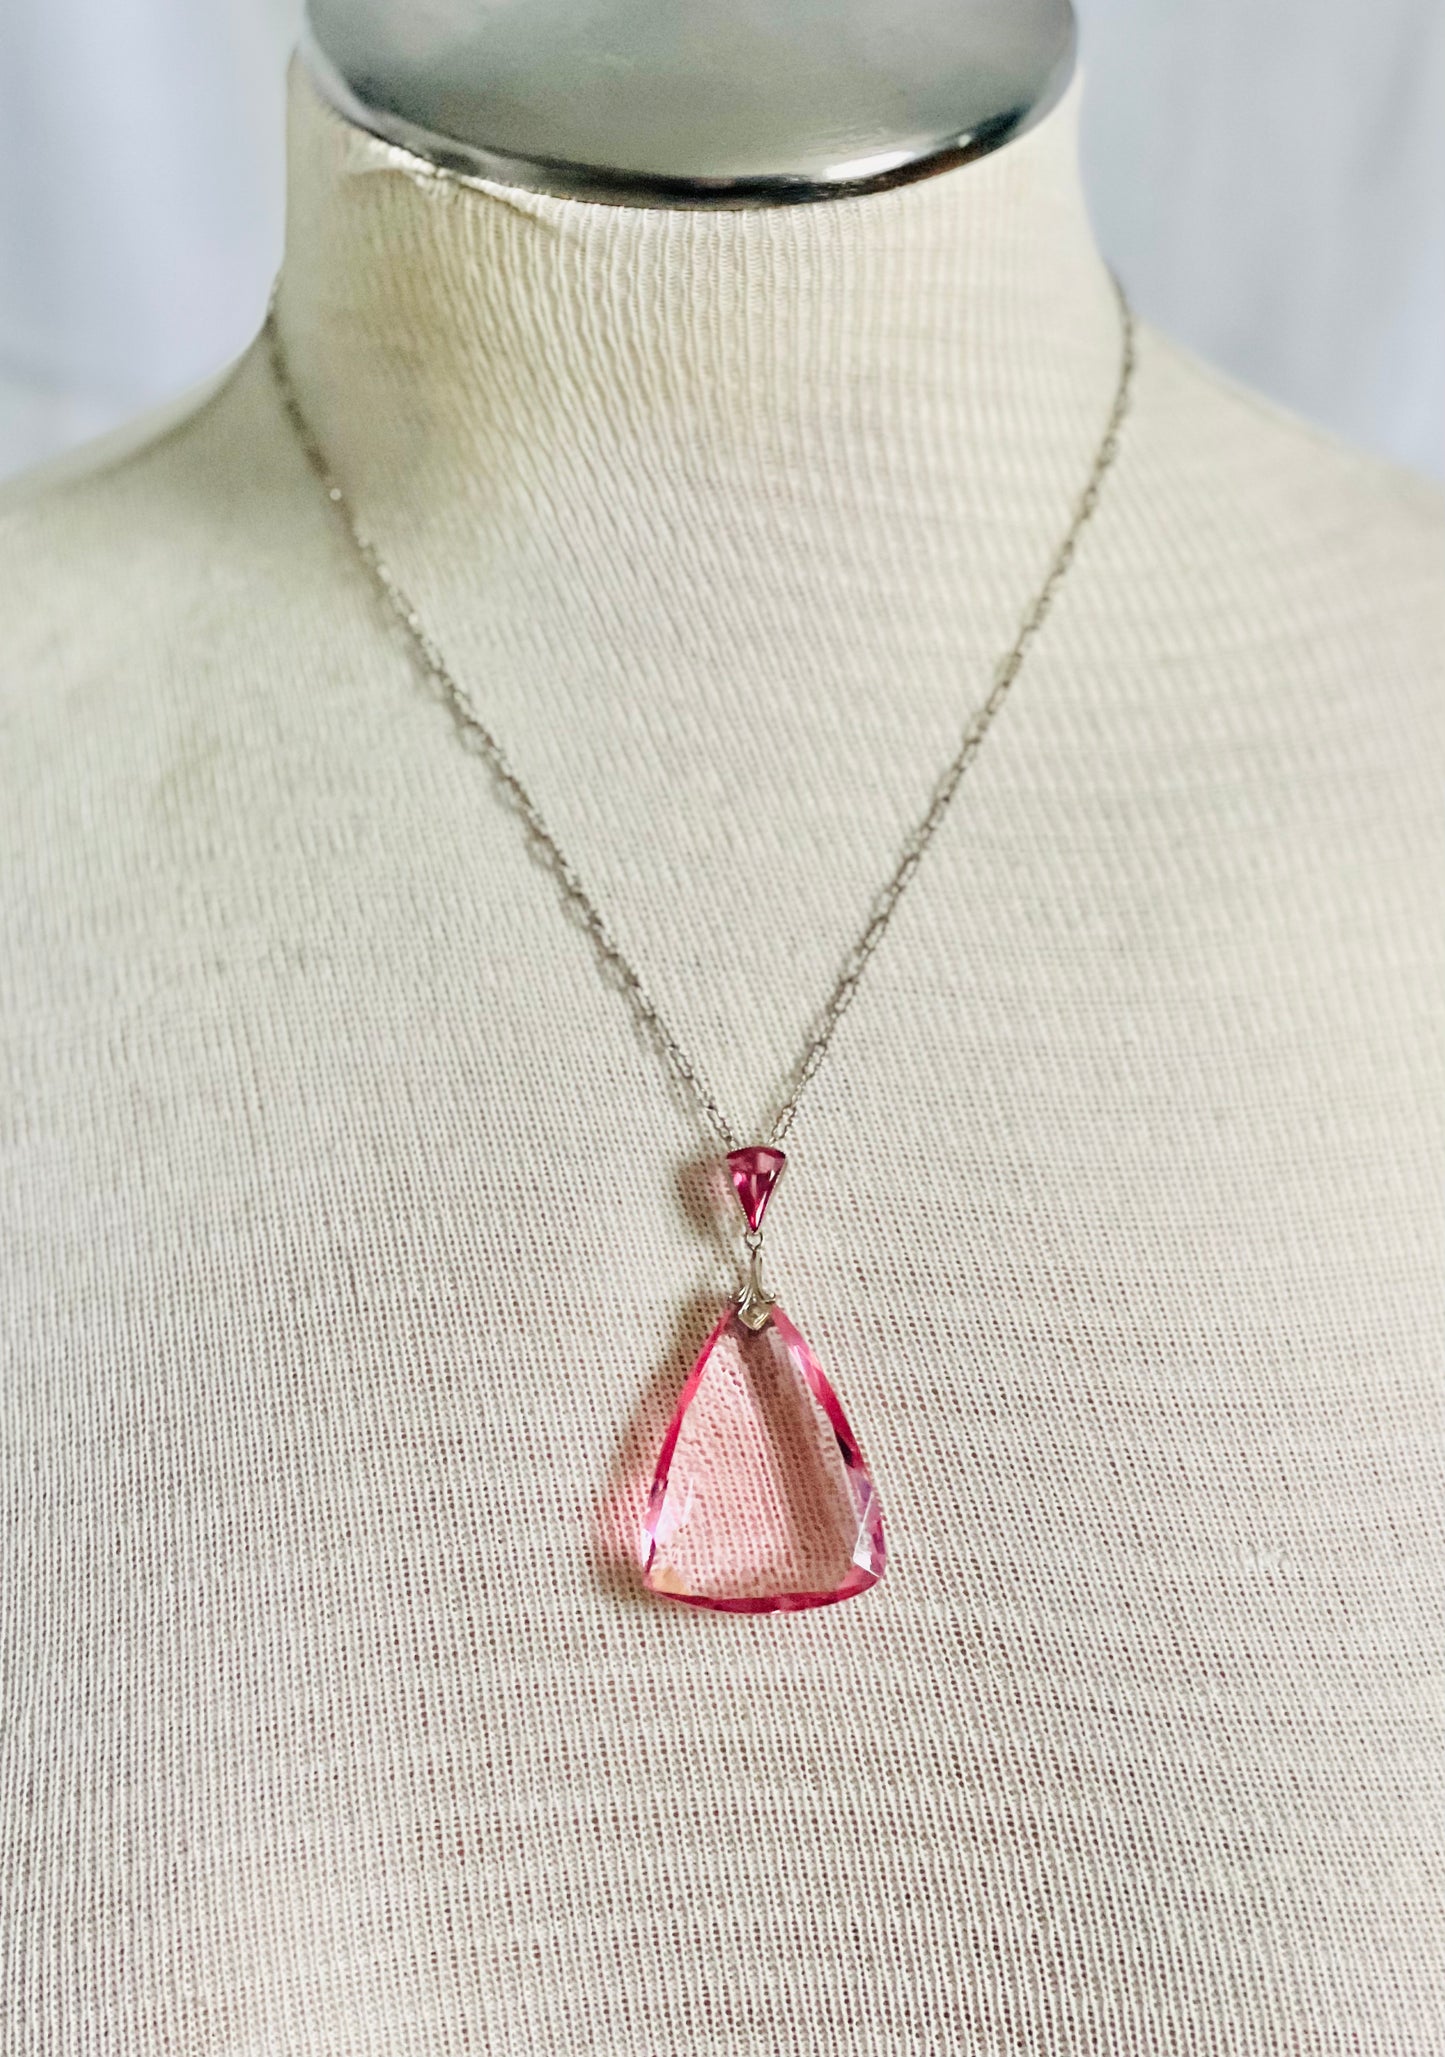 Vintage Pink Faceted Glass Triangle Pendant Necklace